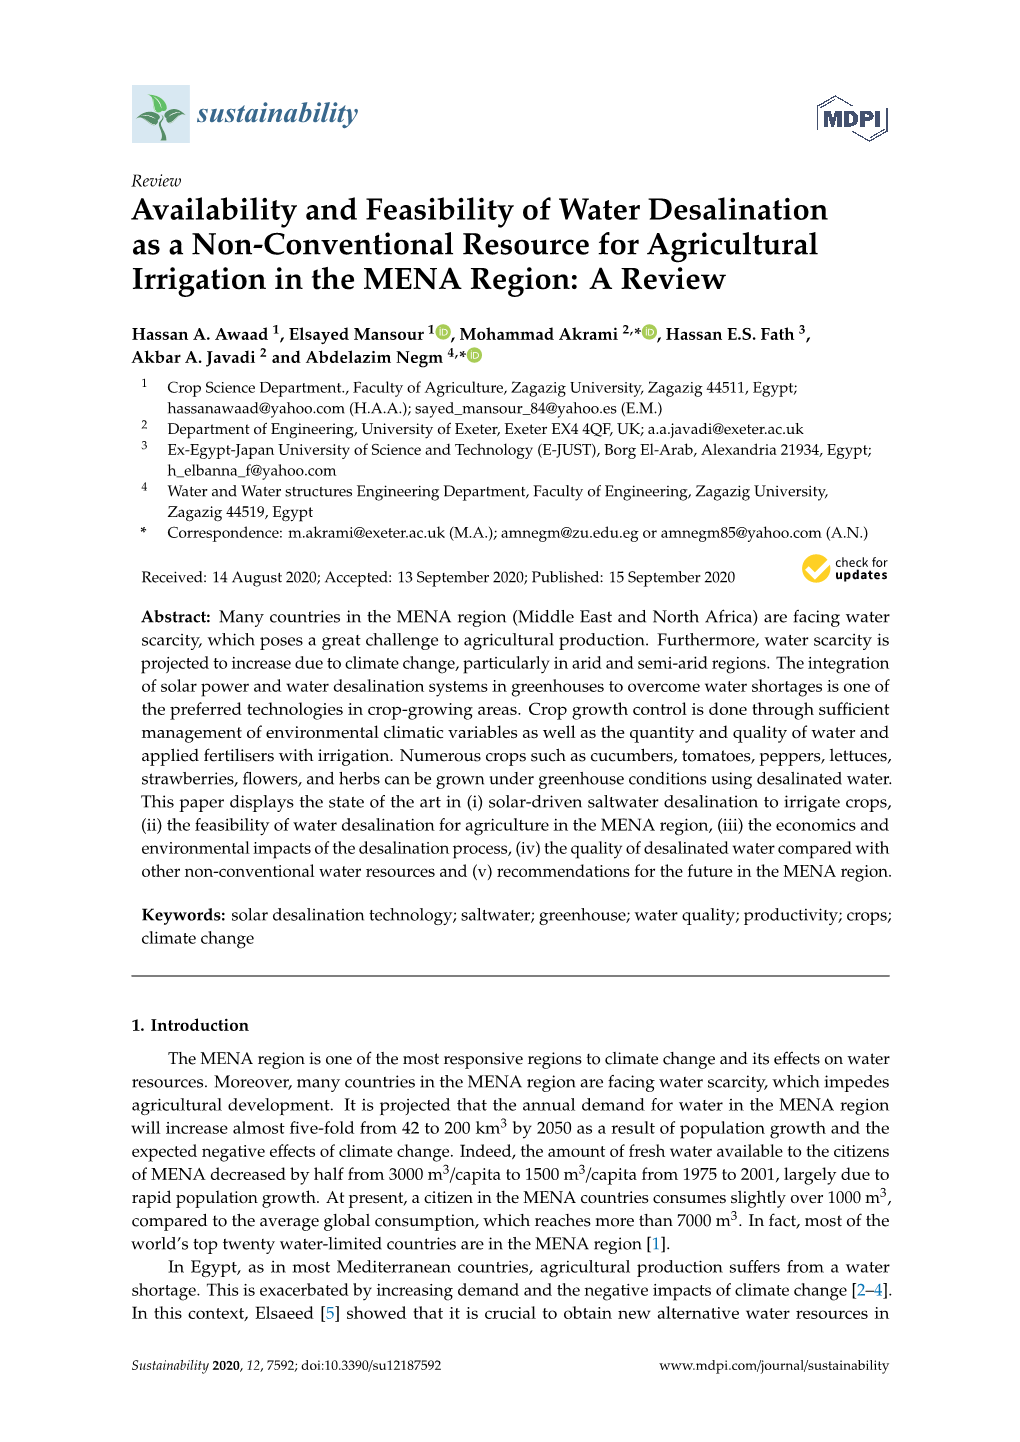 Availability and Feasibility of Water Desalination As a Non-Conventional Resource for Agricultural Irrigation in the MENA Region: a Review